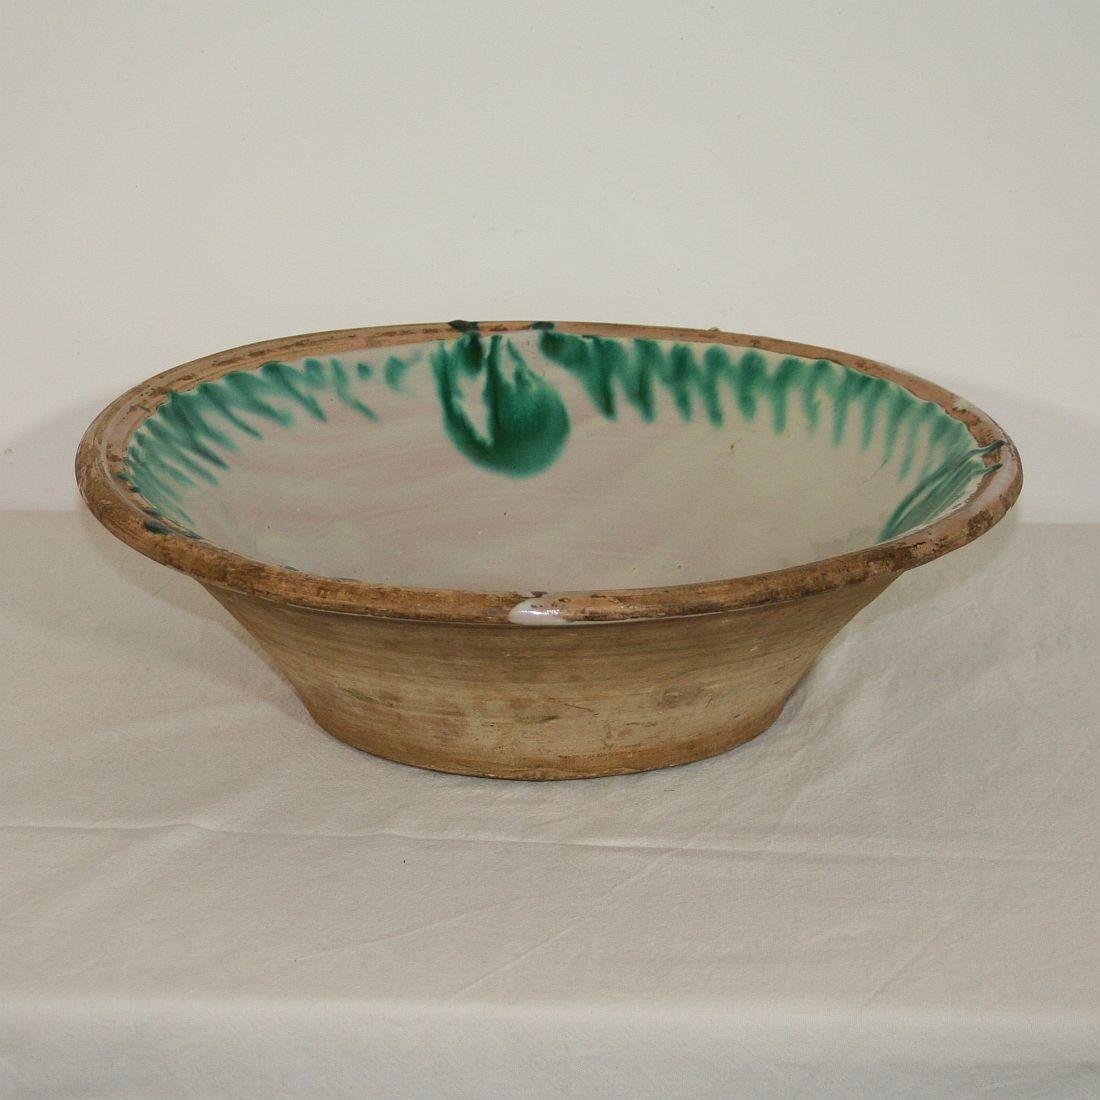 Rustic Large 19th Century, Spanish Glazed Earthenware Dairy Bowl or Tian